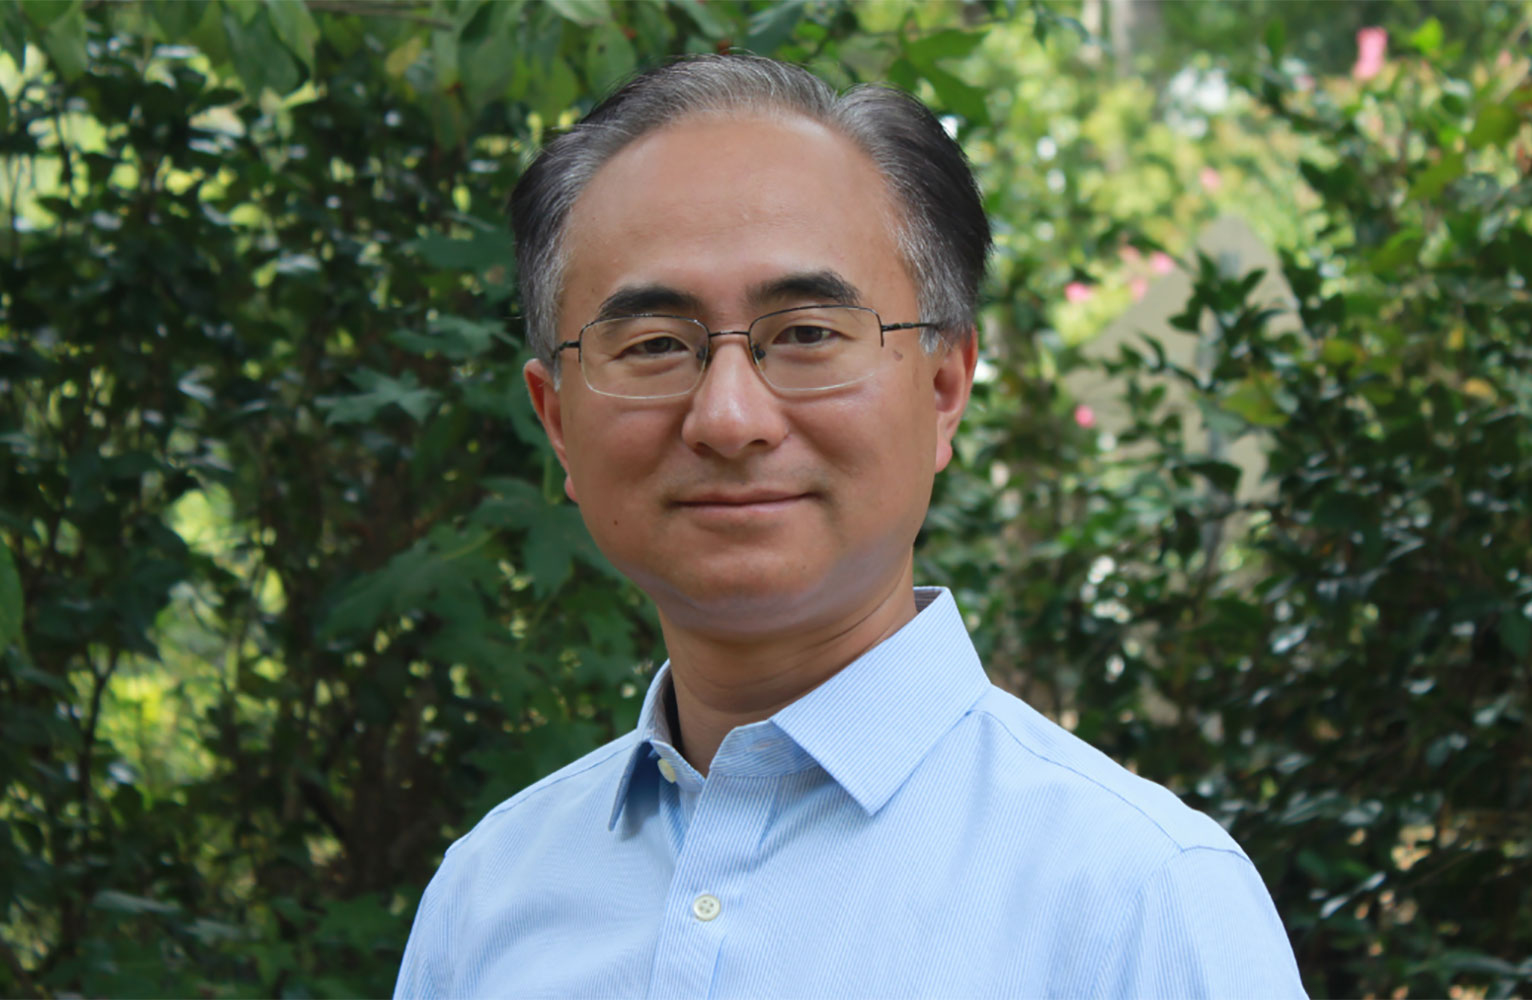 Dr. Wei You, professor and chair of chemistry at Carolina, leads a team supported by a Department of Defense MURI Award